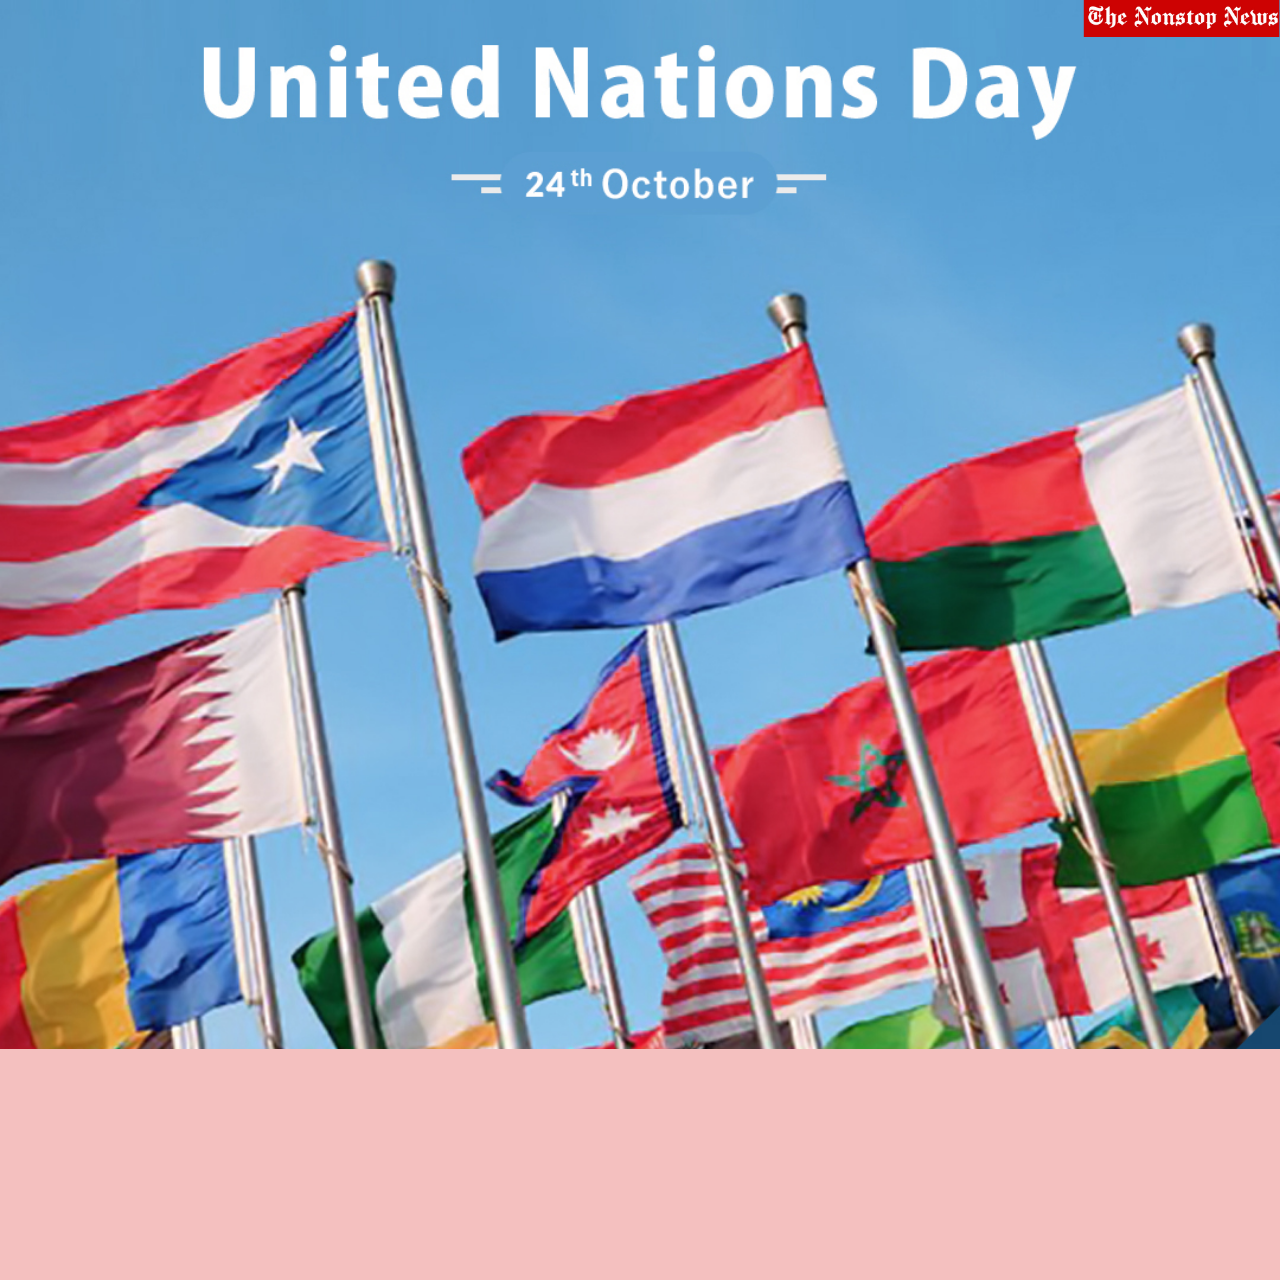 United Nations Day 2021 Quotes, Wishes, Greetings, HD Images, Messages, and Poster to share